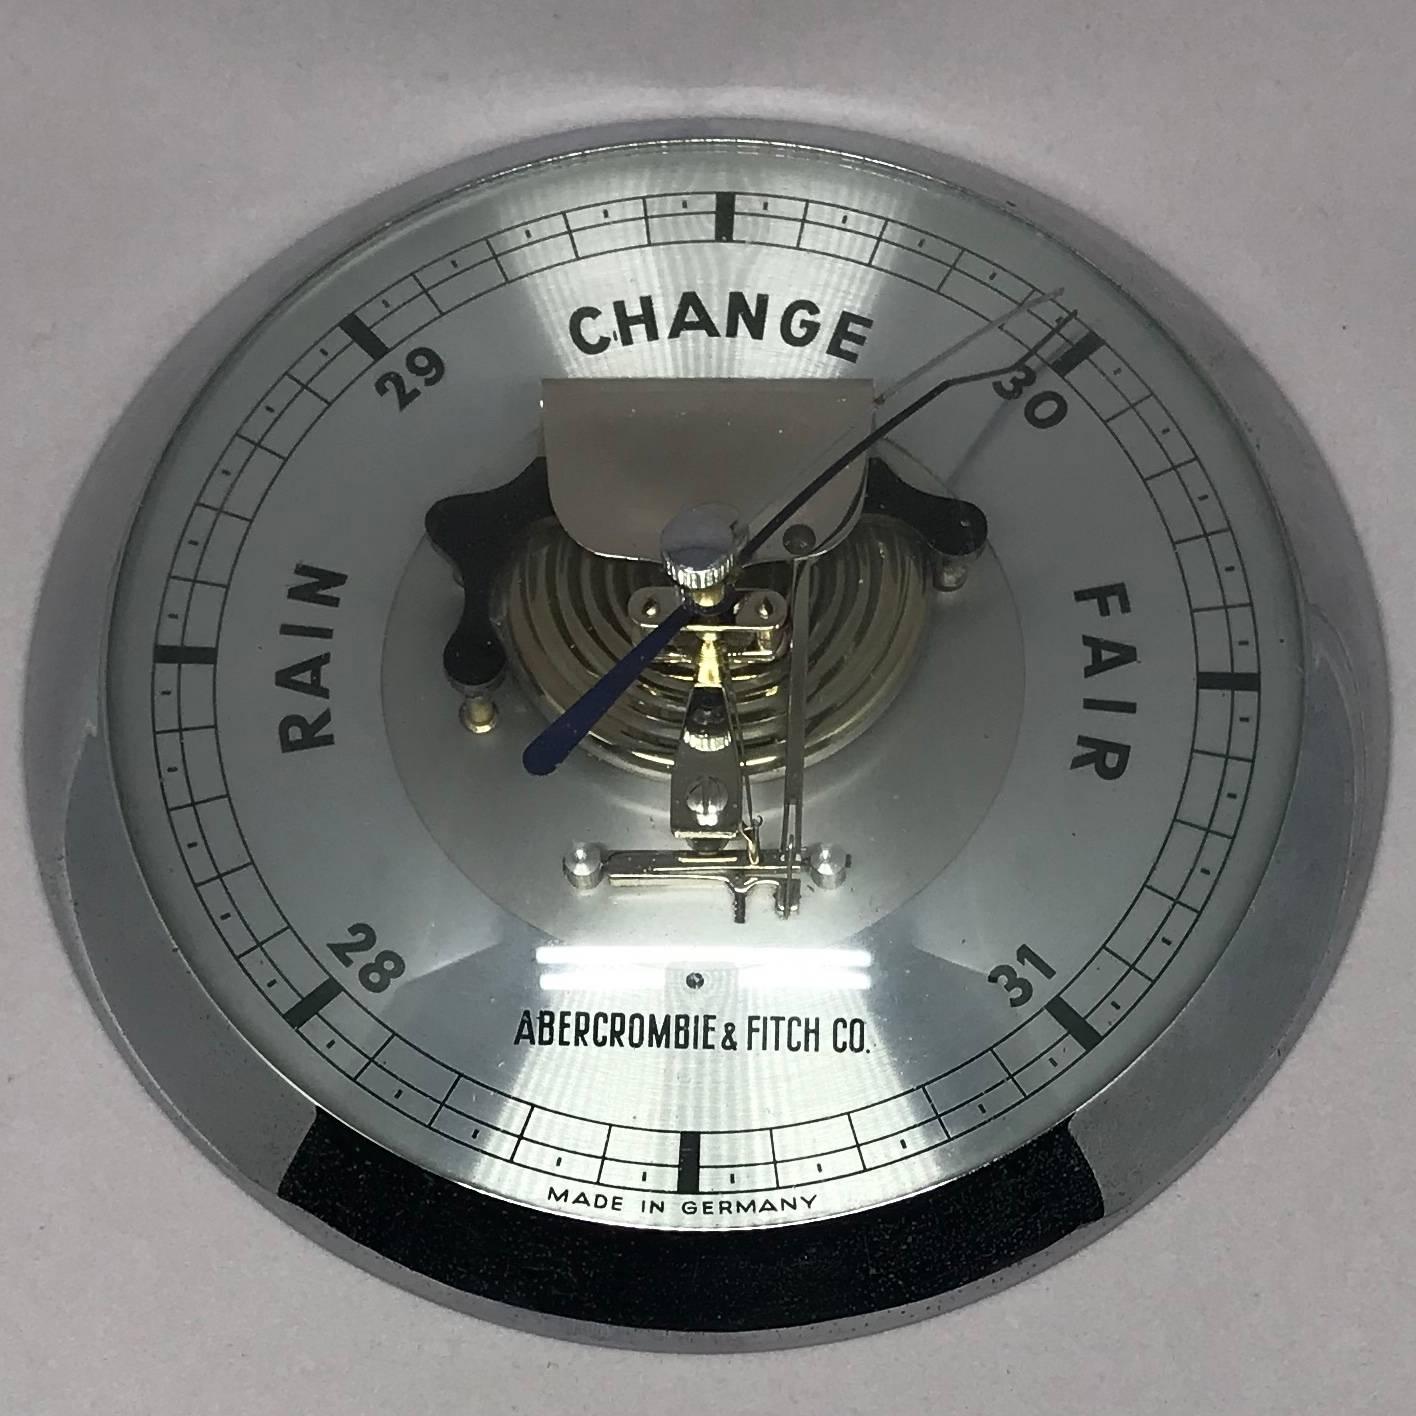 Midcentury Abercrombie and Fitch decorative barometer. Chrome and glass decorative barometer in a very clean midcentury style. 
Dimensions: 6.25